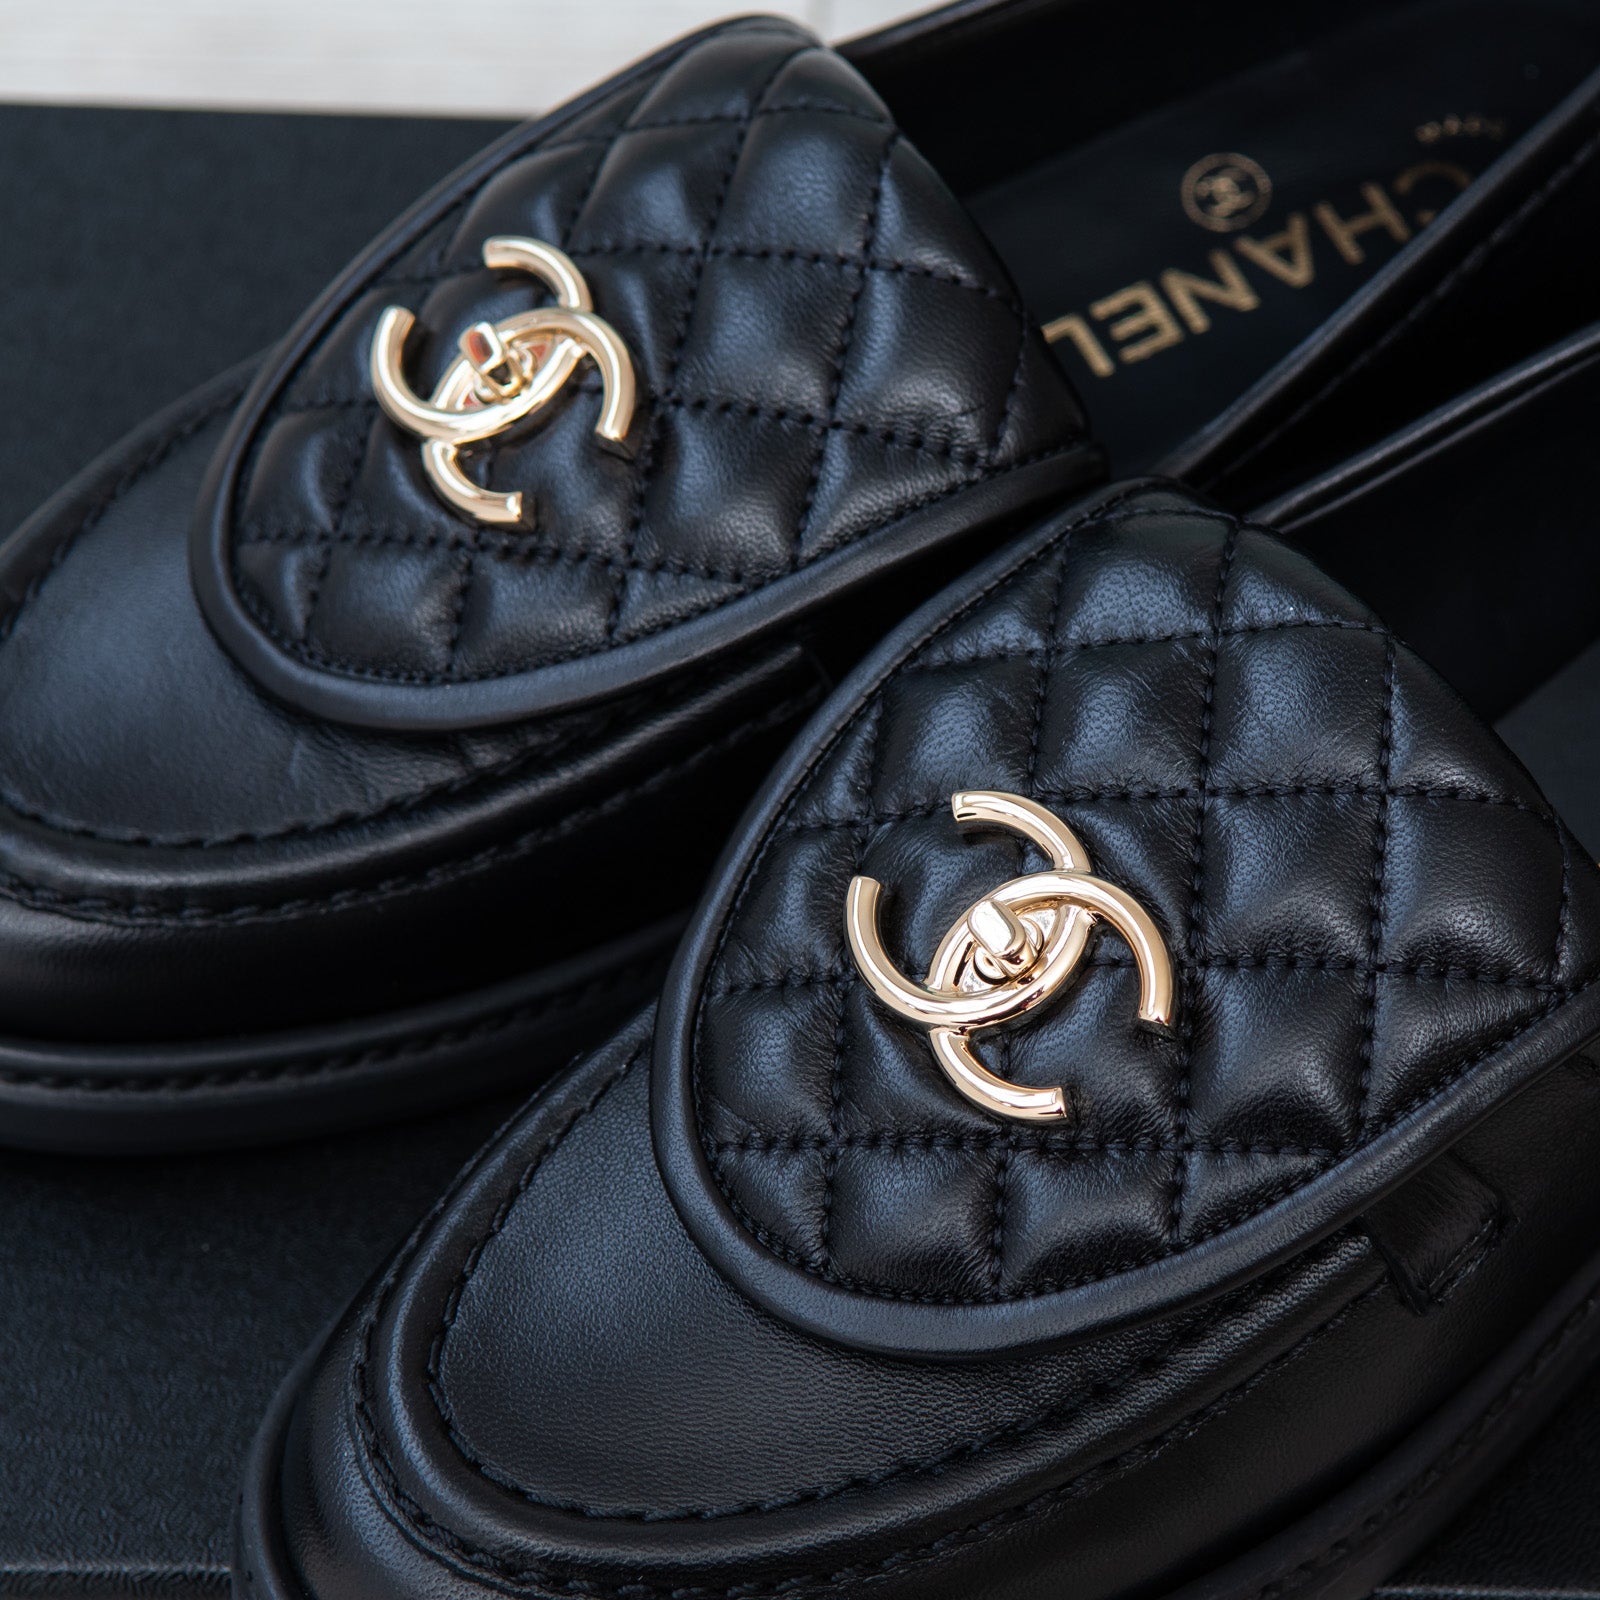 Chanel Black Leather Loafers - Image 4 of 5